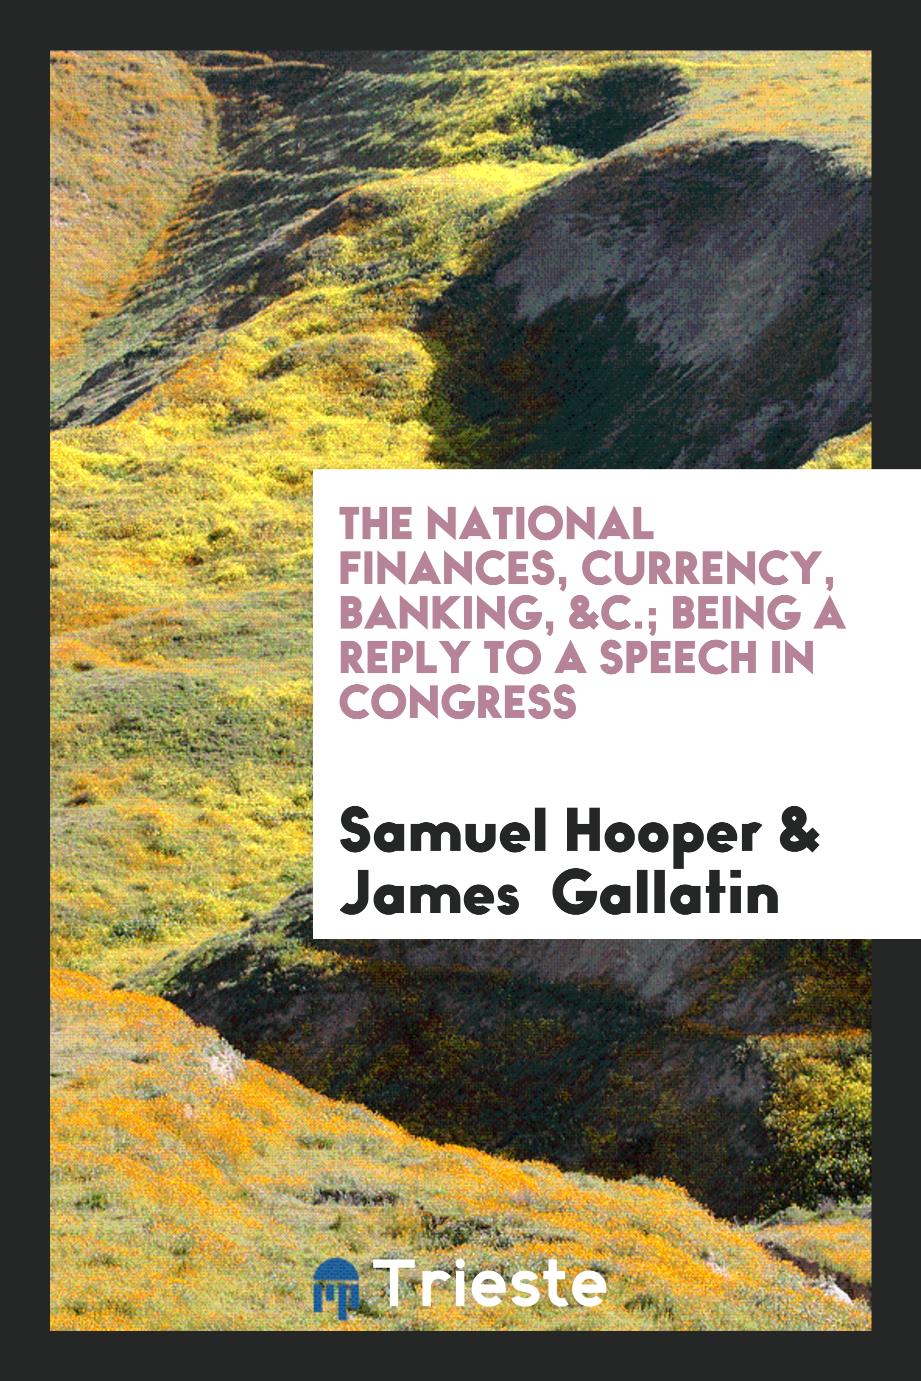 The National Finances, Currency, Banking, &c.; Being a Reply to a Speech in Congress